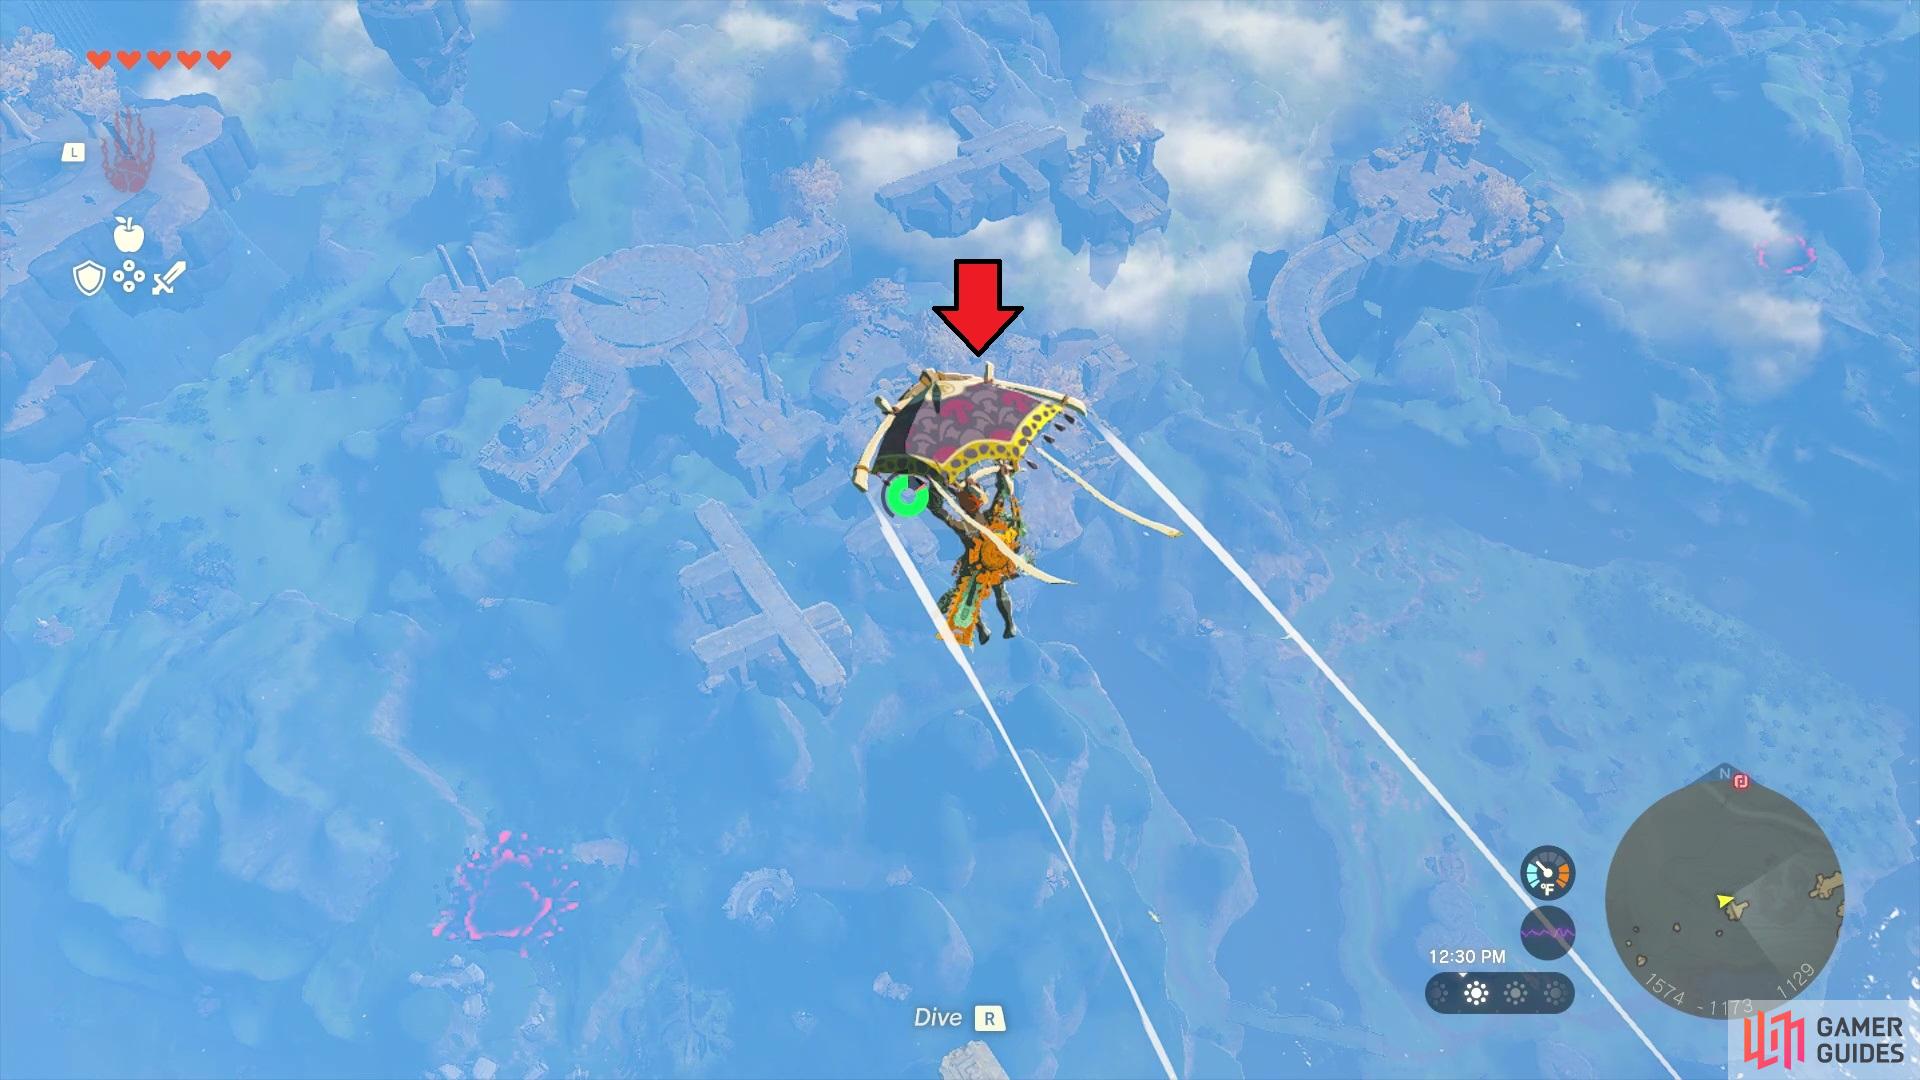 You will want to land on this island pointed out in the screenshot